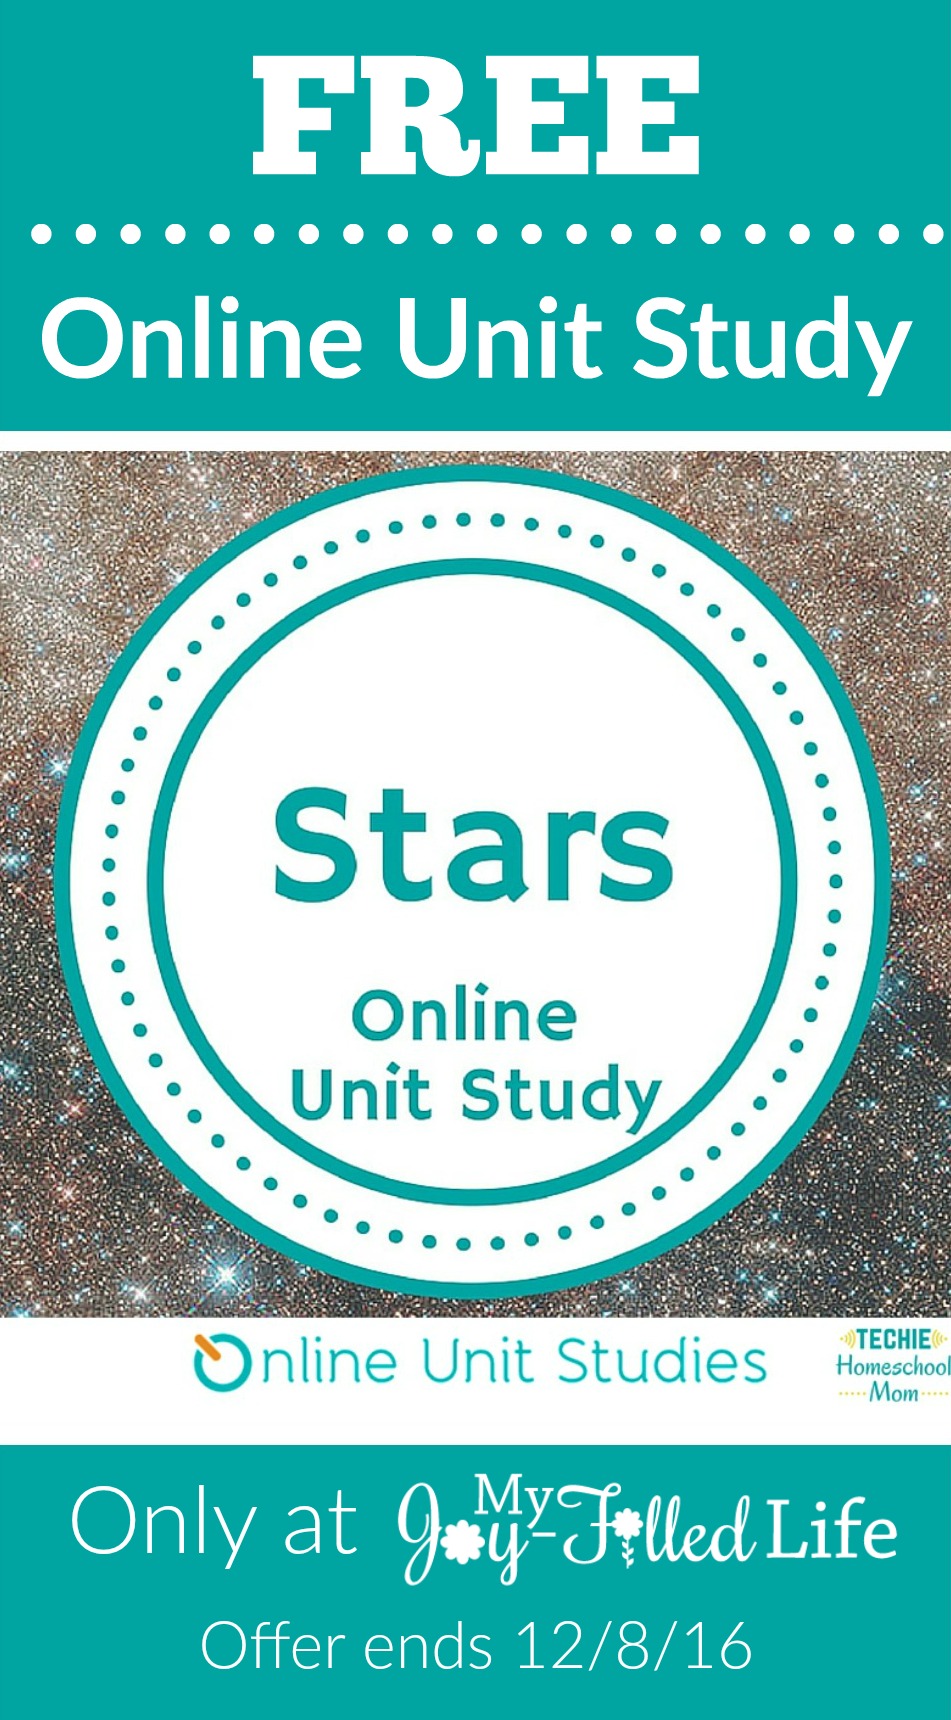 FREE online unit study about stars!  For a limited time only!